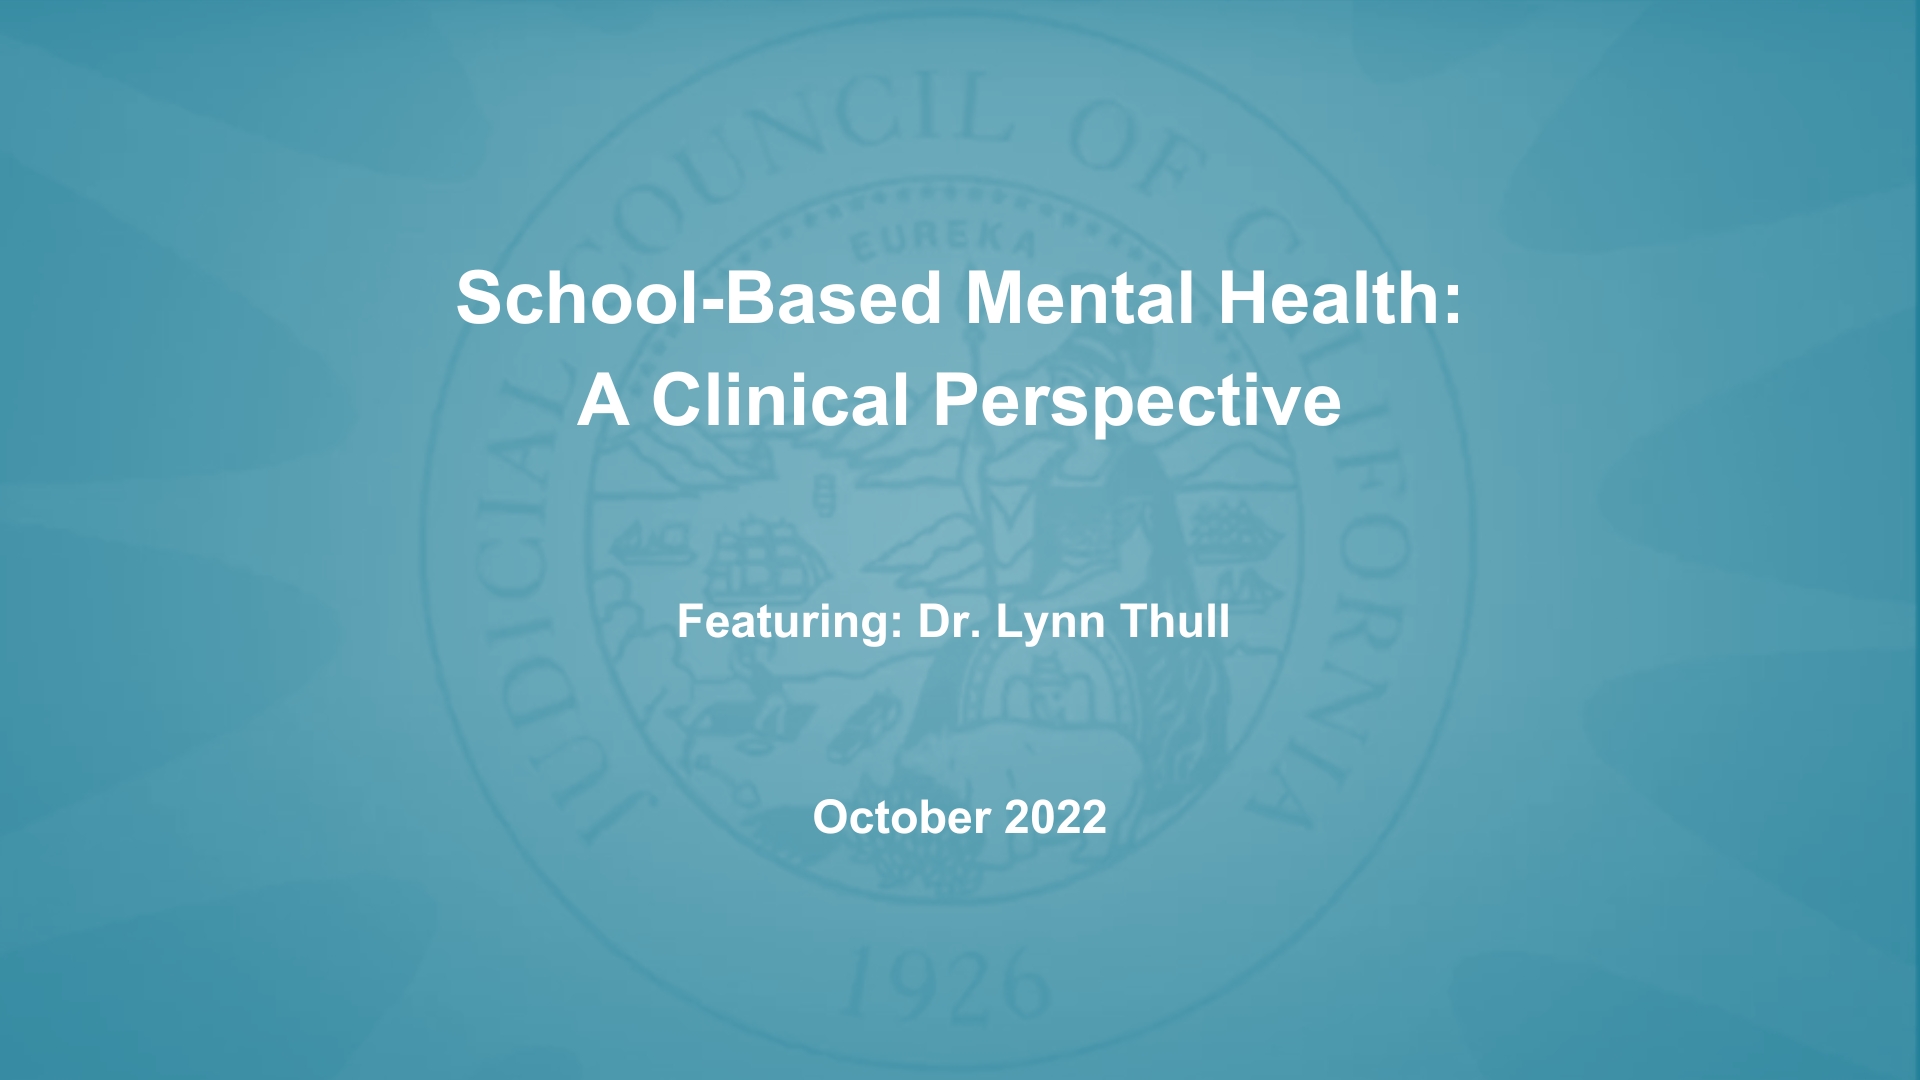 School-Based Mental Health: A Clinical Perspective